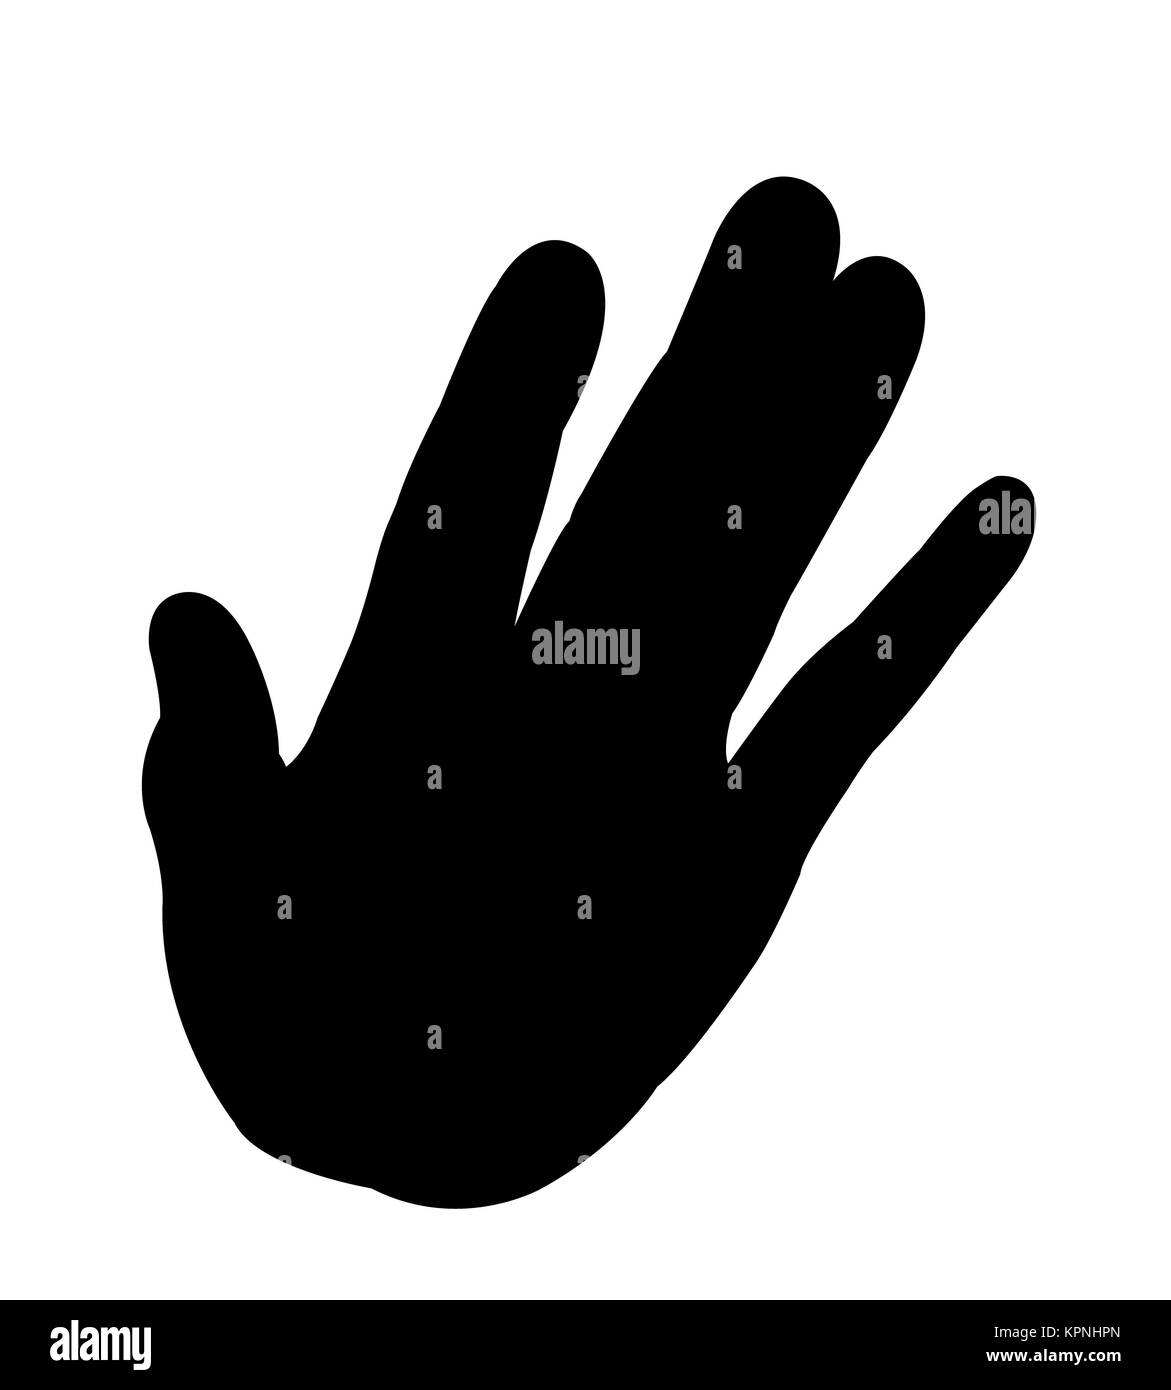 lady hand silhouette Stock Photo